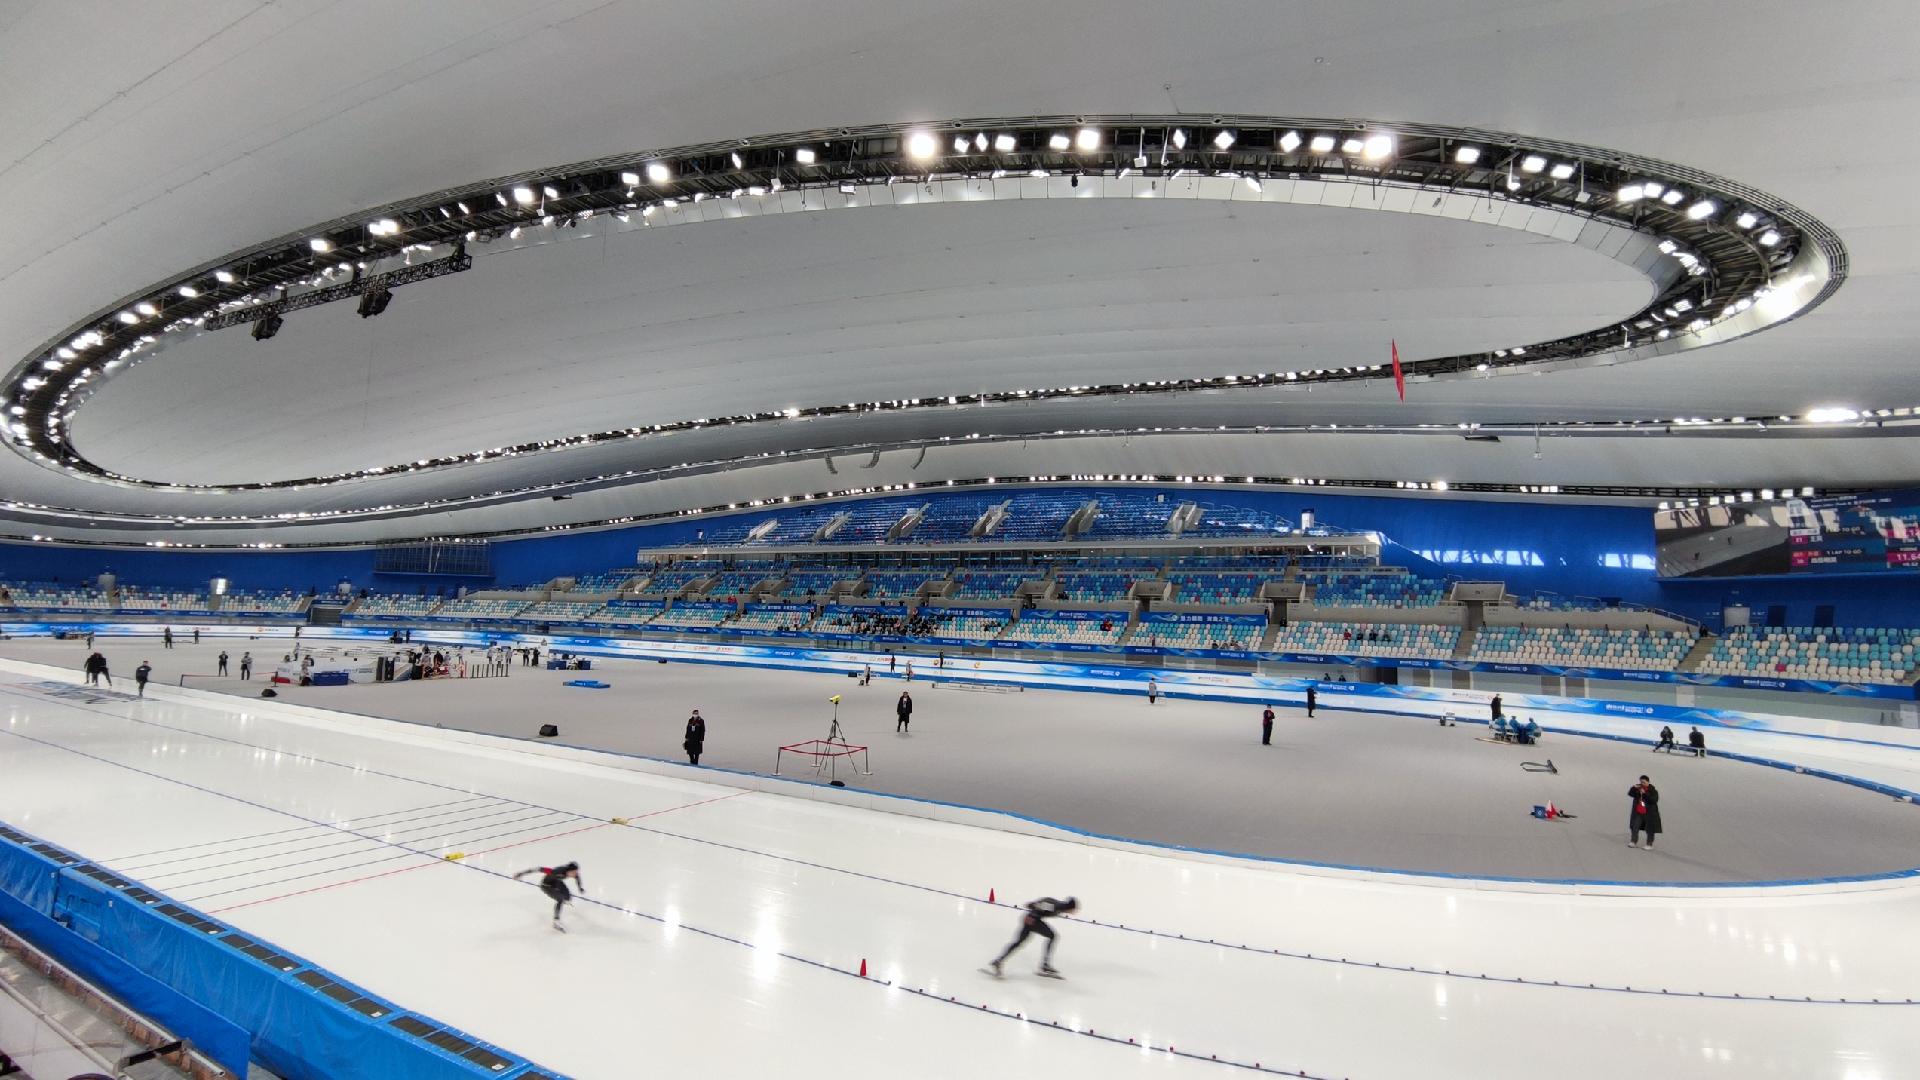 Live Speed skating at newly built 'Ice Ribbon' in Beijing CGTN